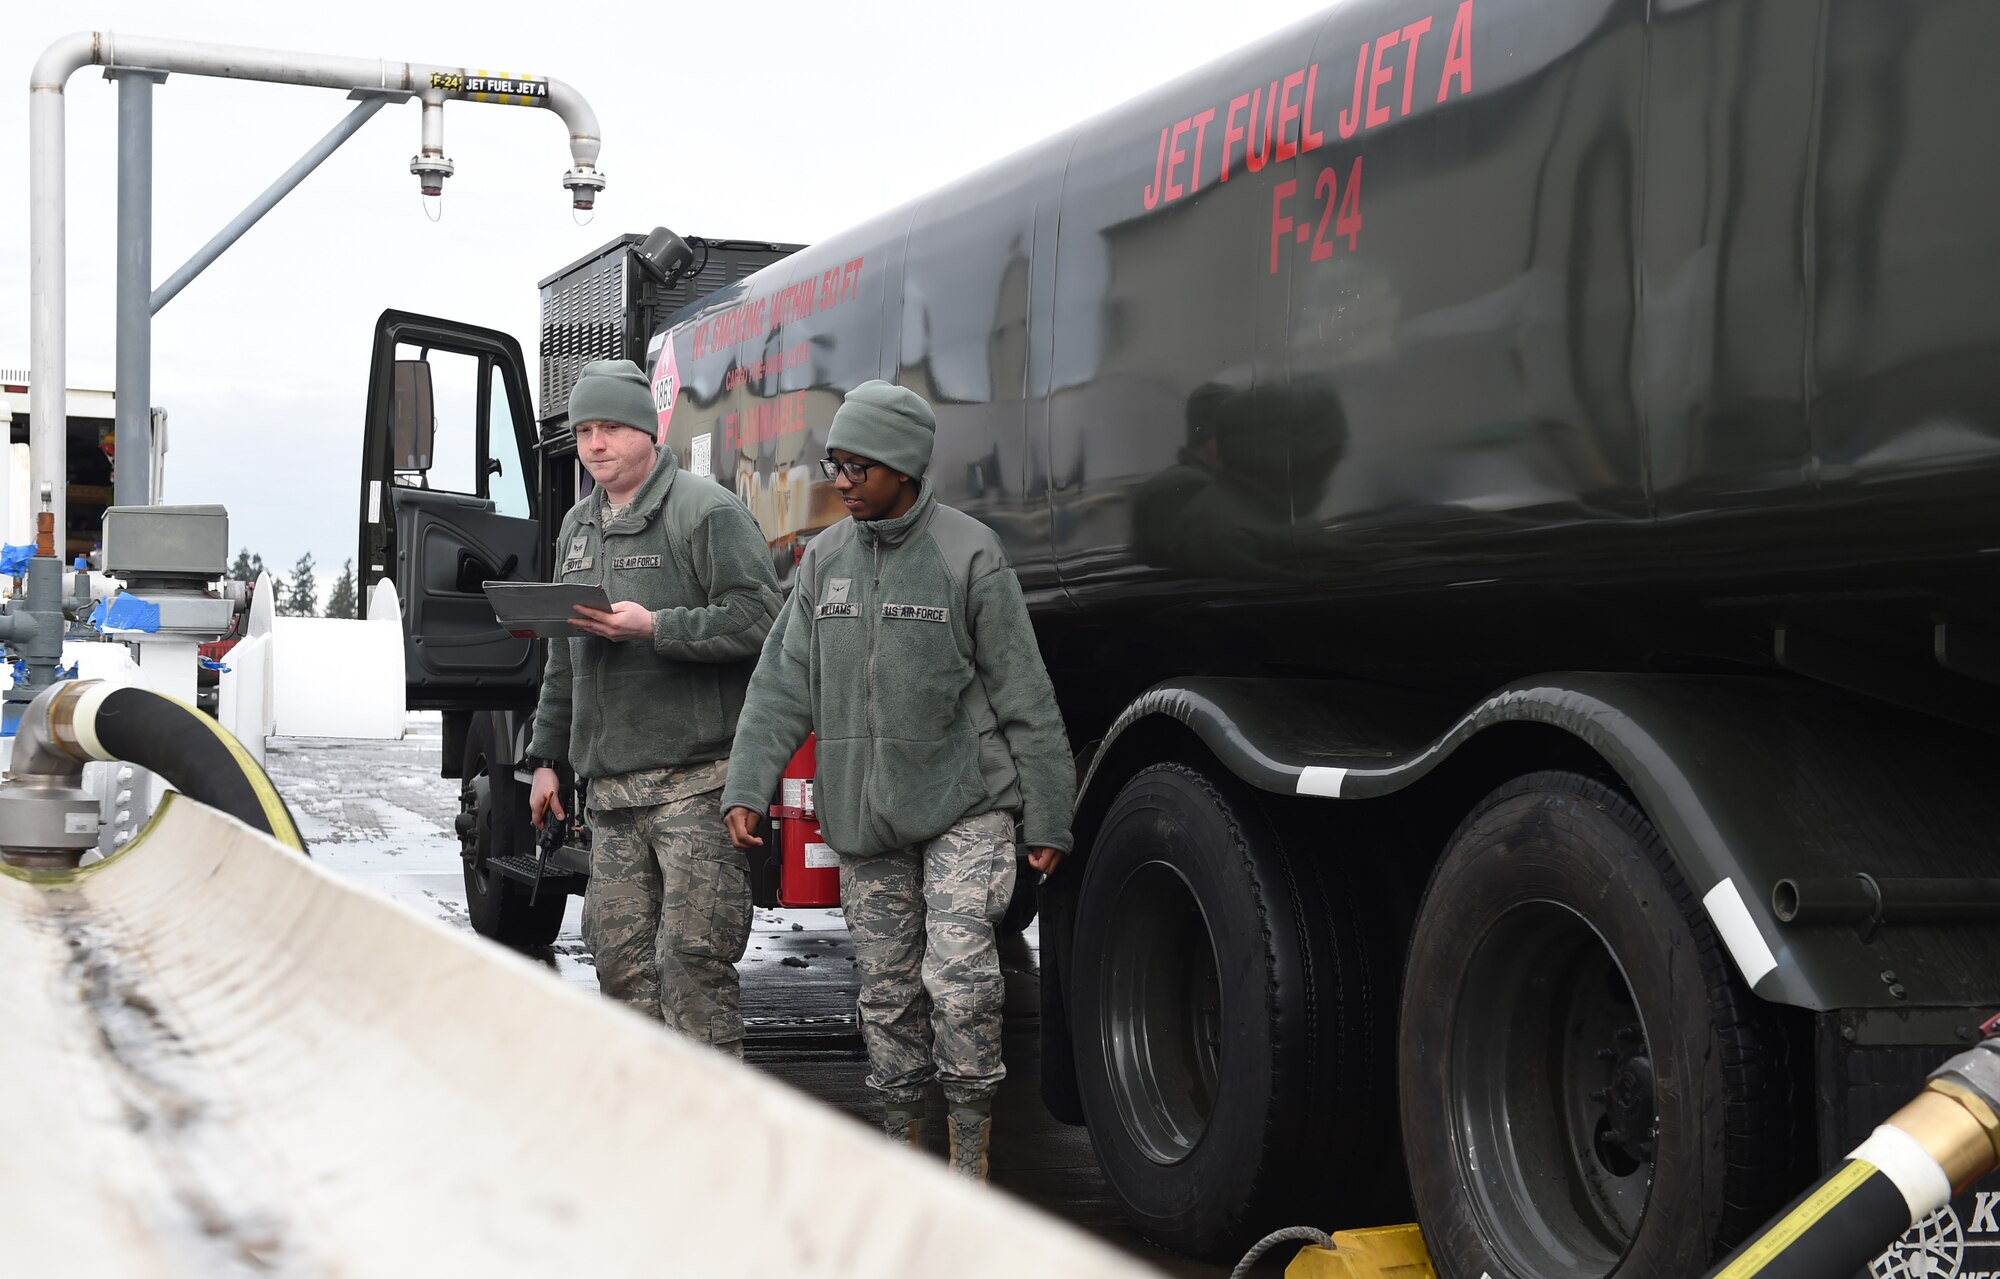 Senior Airman Mason Boyd (Left) and Airman Katara Williams, 627th Logistics Readiness Squadron fuels apprentices, add fuel to a fuel truck on Joint Base Lewis-McChord, Wash., Feb. 7, 2017. The 627th LRS has 11 fuel trucks, which have 6,000 gallon tanks that can issue up to 600 gallons per minute each. (Air Force Photo/ Staff Sgt. Naomi Shipley)